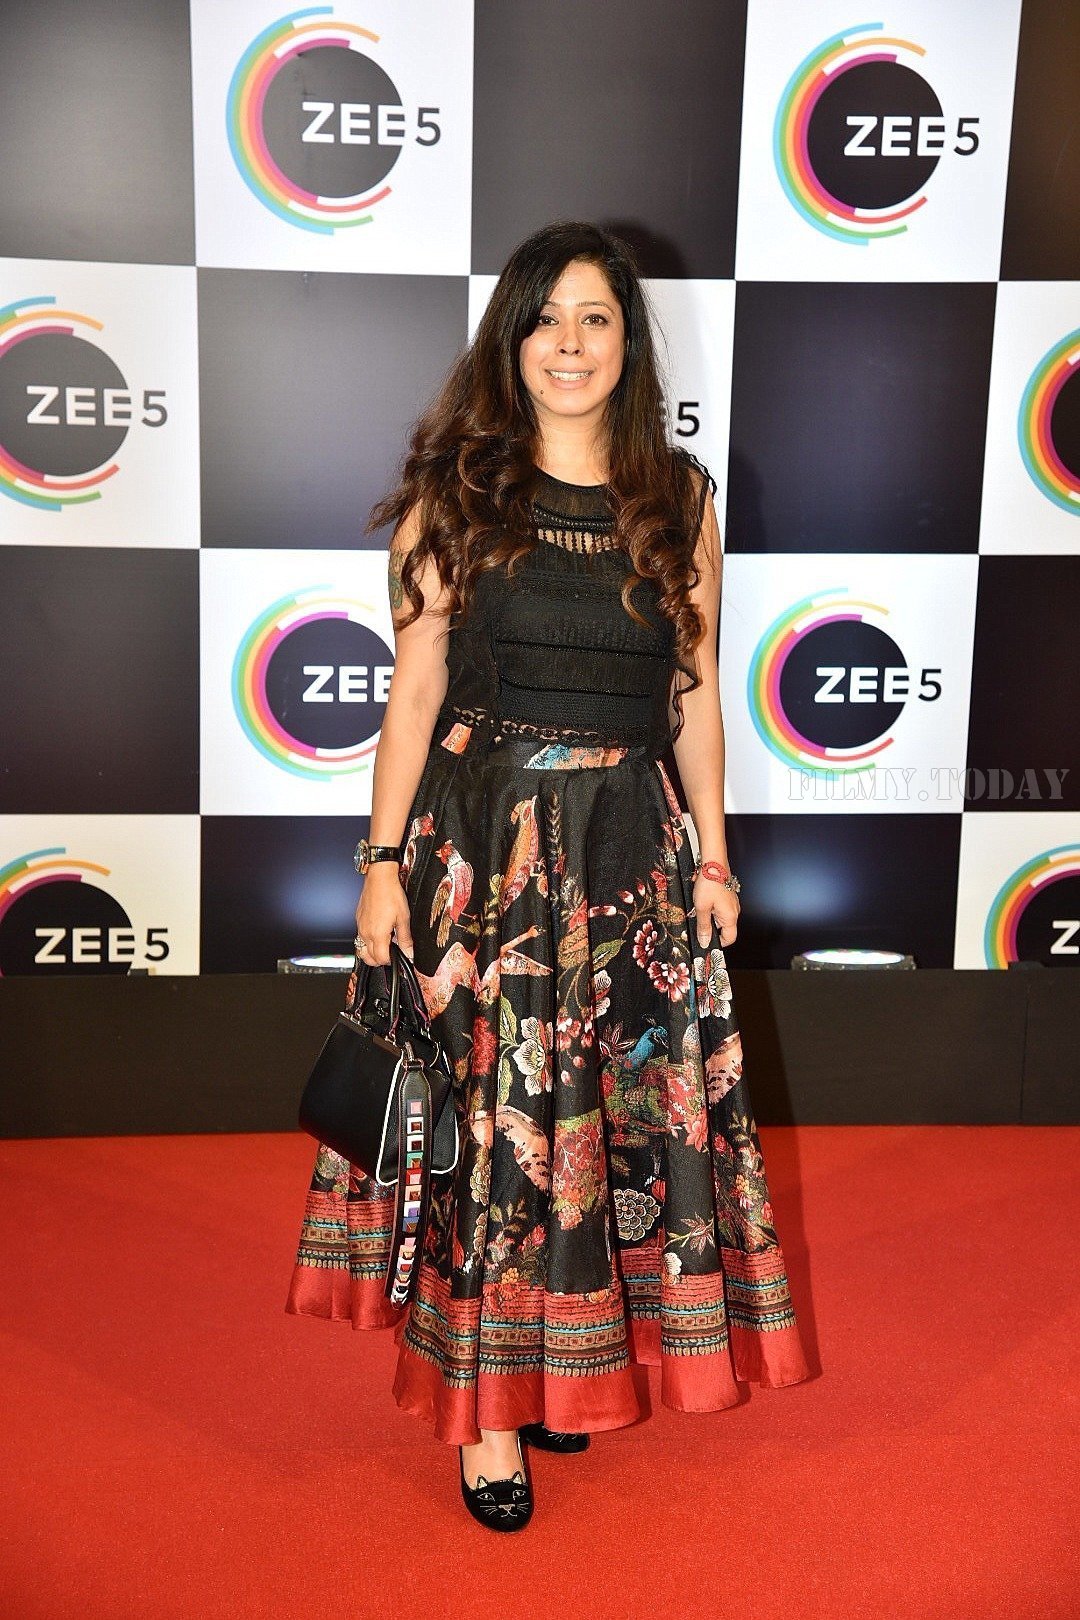 Photos: Red Carpet Of 1 Year Anniversary Of Zee5 App | Picture 1627498